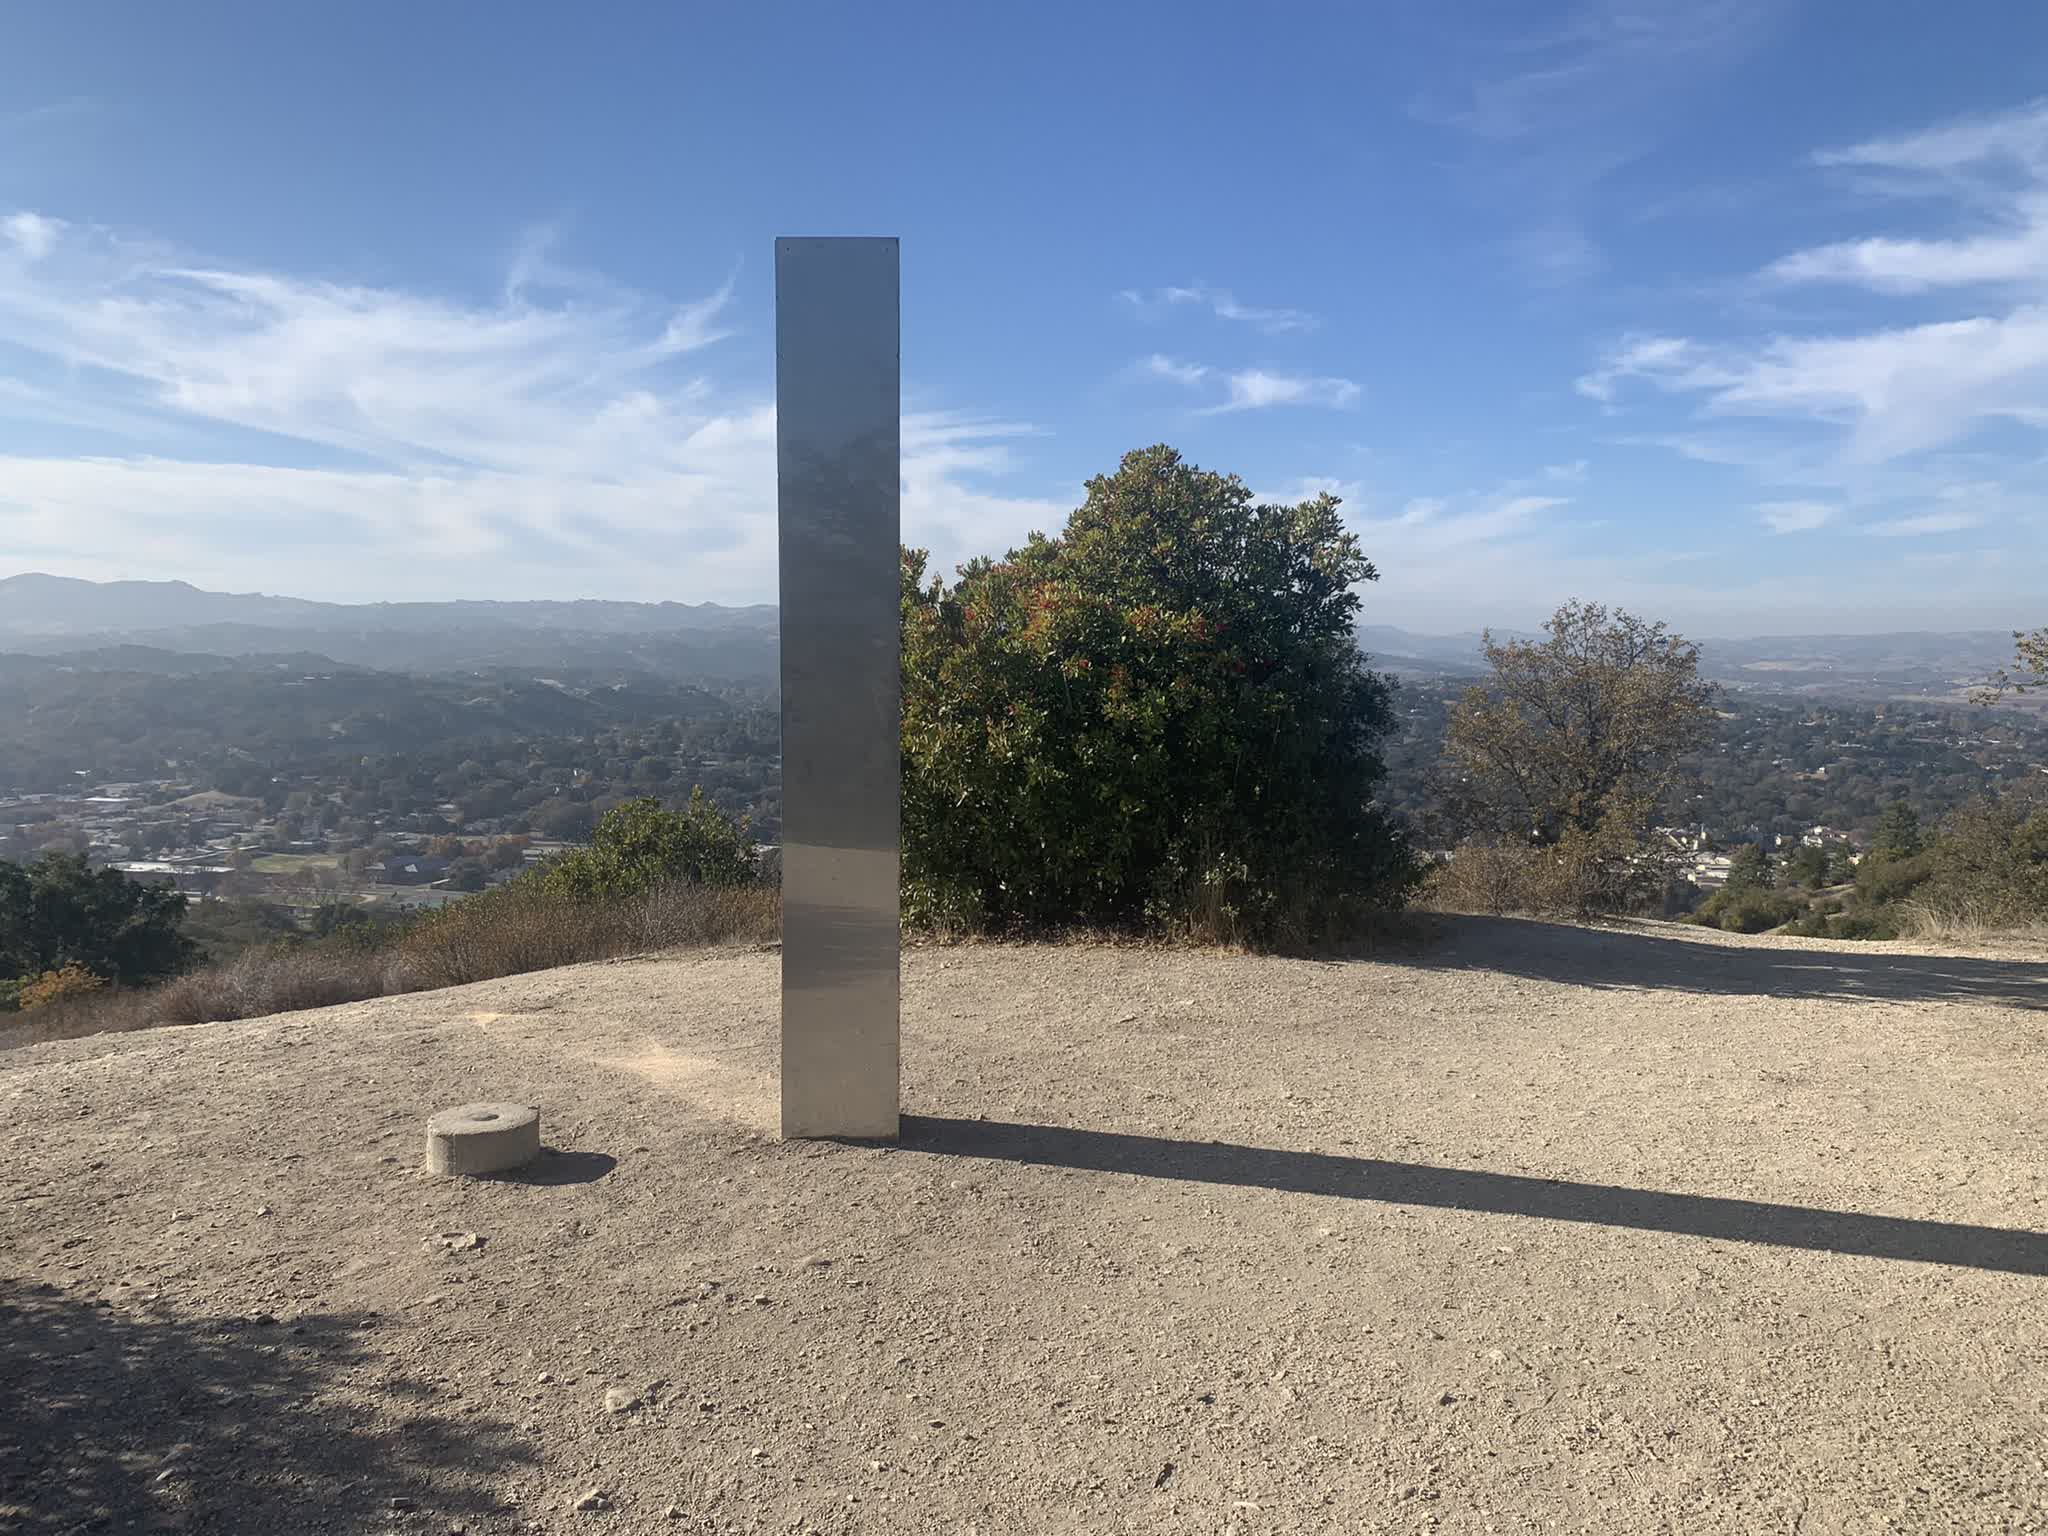 A third metal monolith appears, this one in California